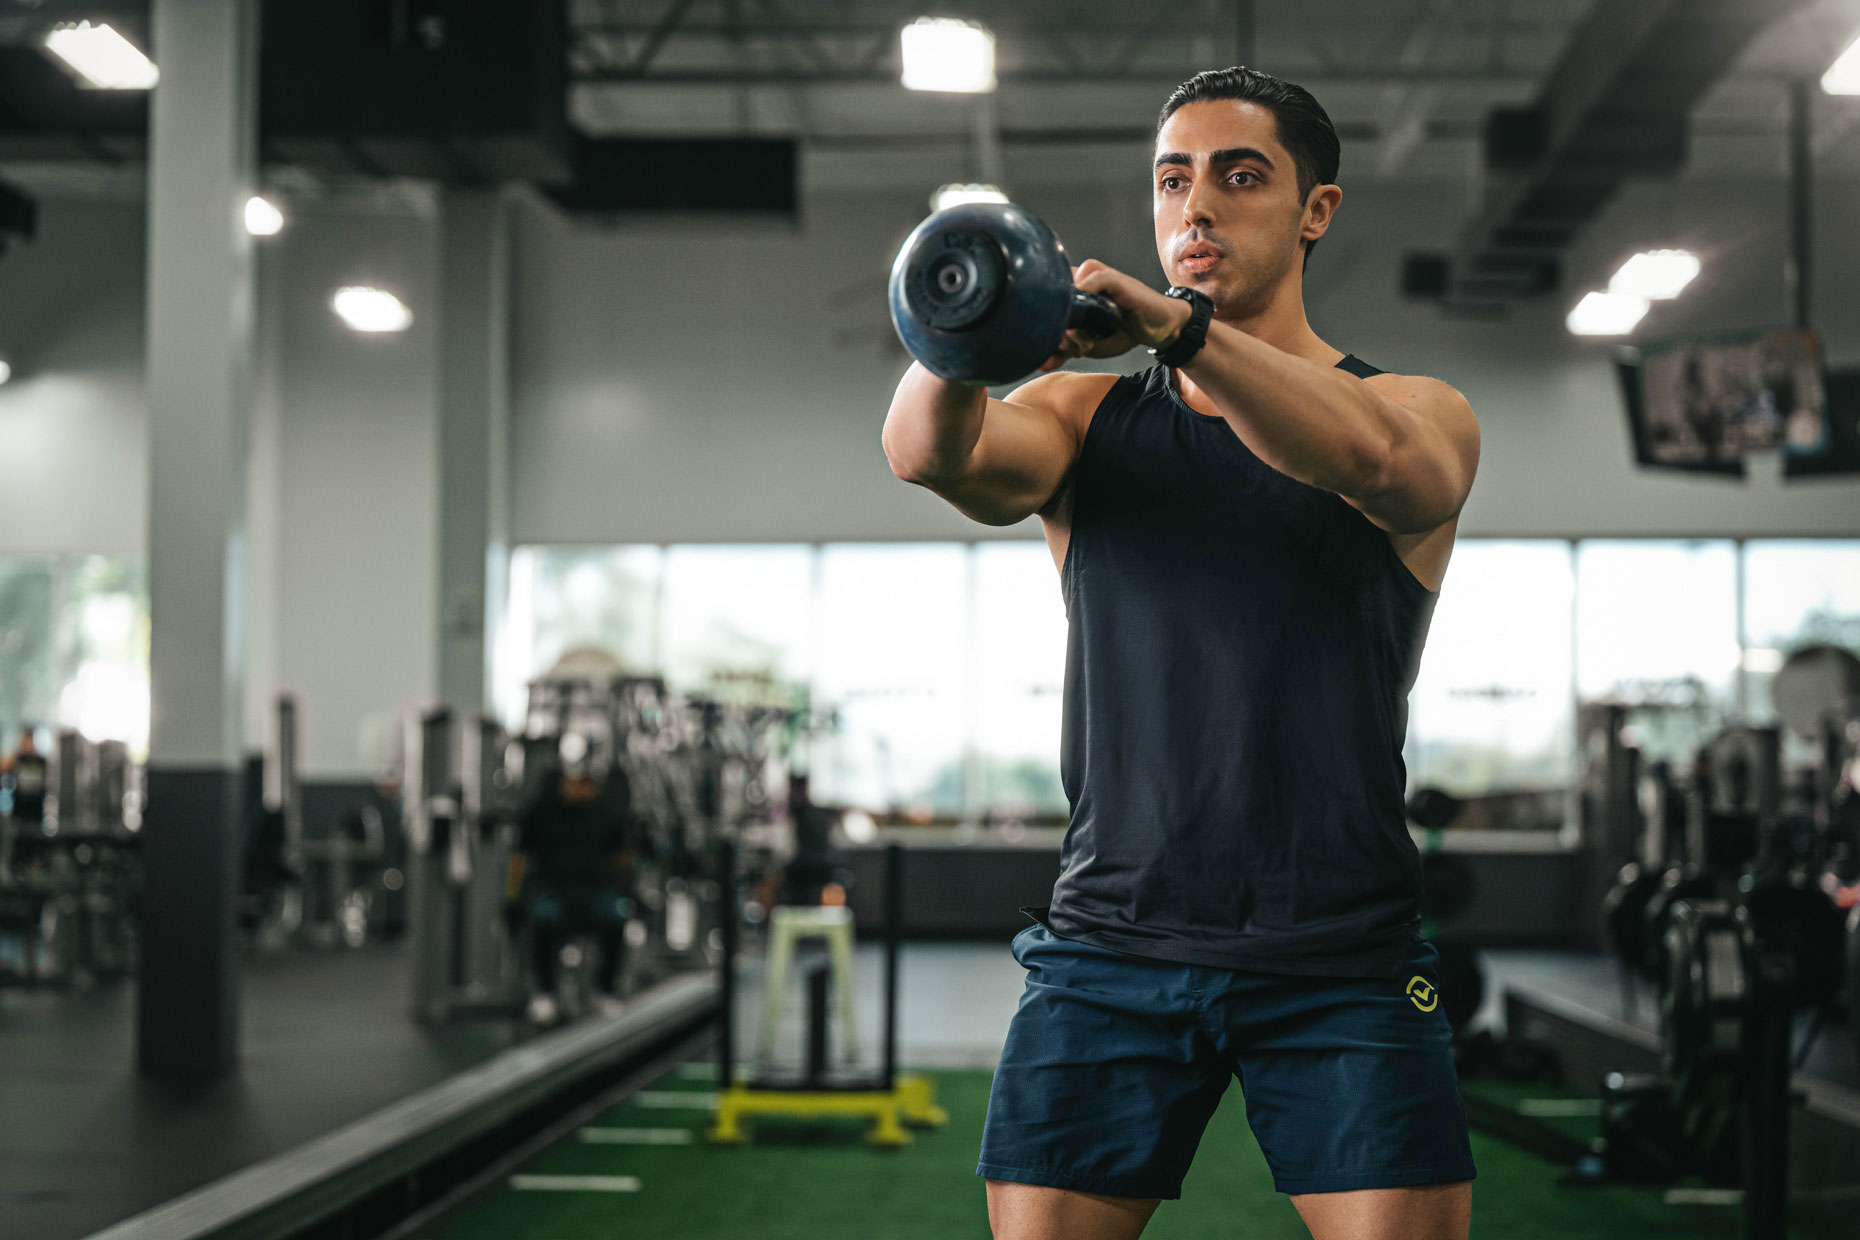 Kettlebell Basics: 7 Ways to Put This Piece of Gym Equipment to Good ...